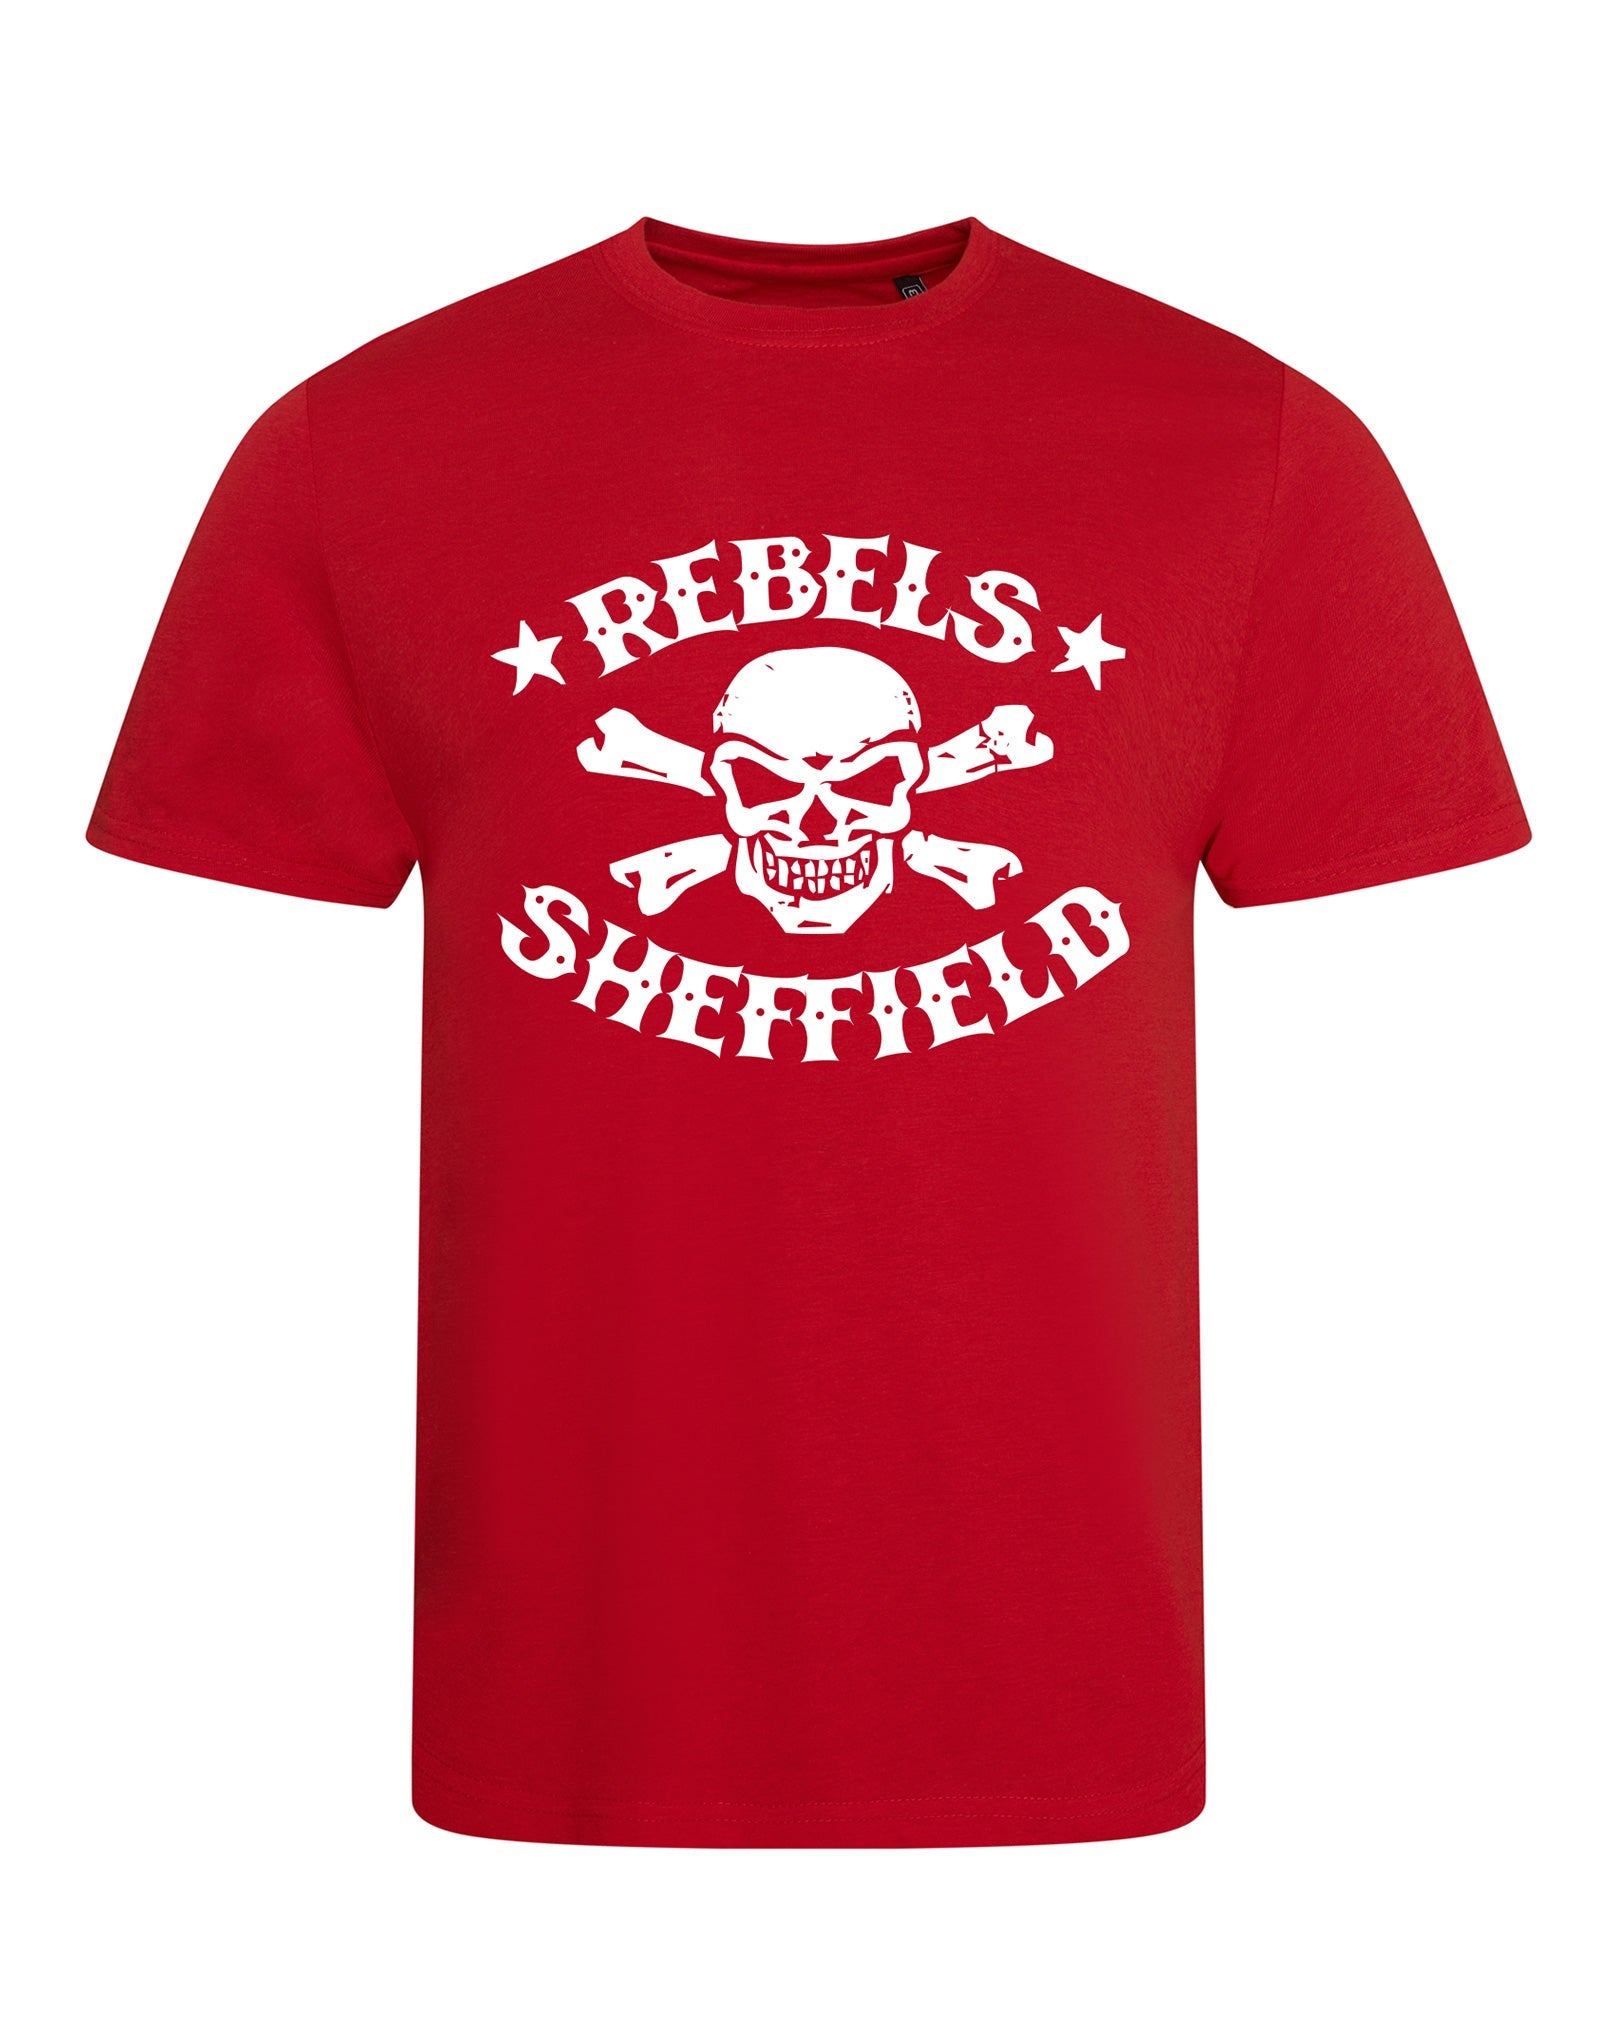 Rebels skull crossbones unisex fit T-shirt - various colours - Dirty Stop Outs